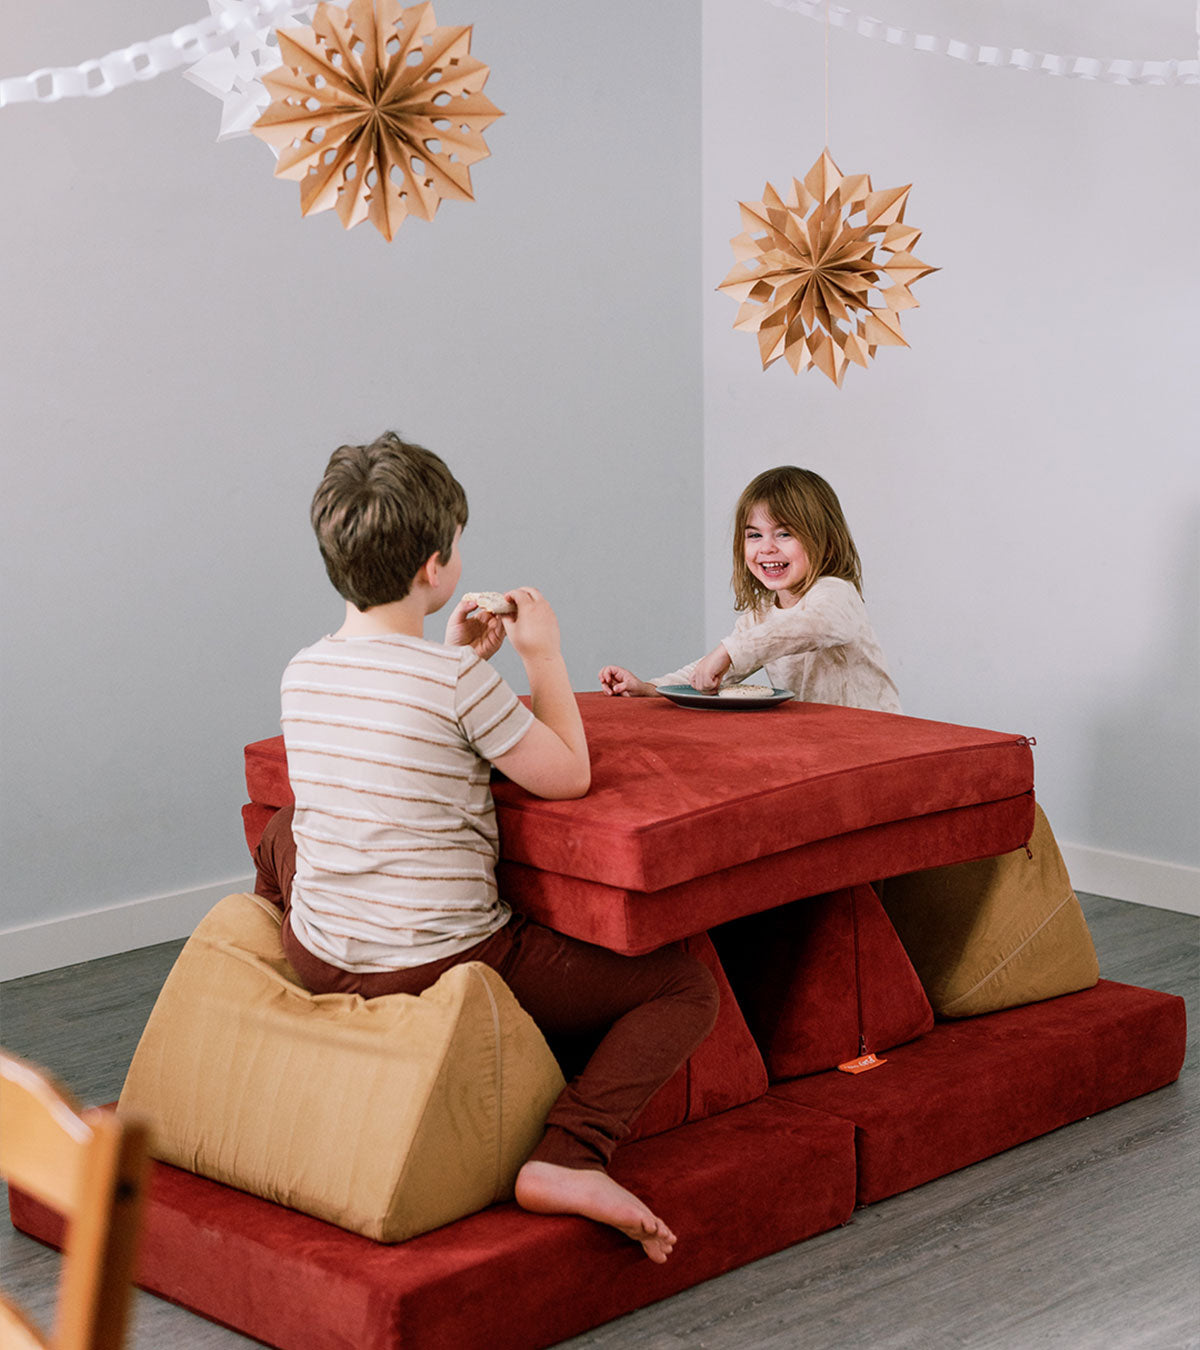 Two children sit at a "Nugget table" build made with Redwood and Sandcastle Nuggets, with two decorate stars suspended from the ceiling above.